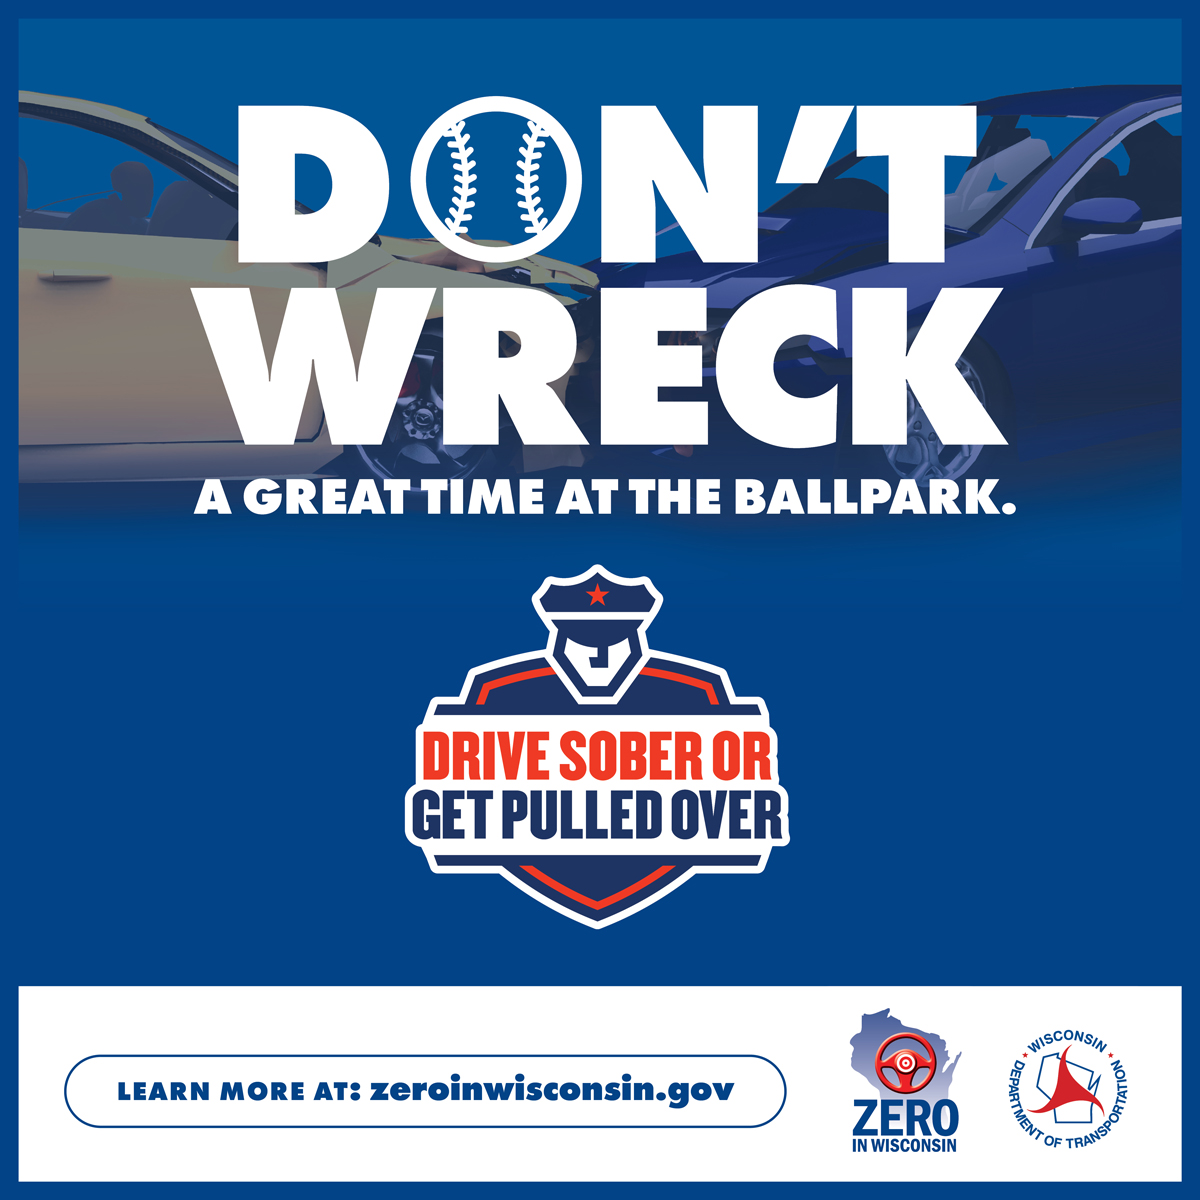 No doubt that you’ll strike out if you drive drunk. If you drink at the ballpark, make a plan 
to get home from today’s game, including rideshare, cabs and more. 
DRIVE SOBER OR GET PULLED OVER. #Don’tWreckAGreatTime 
#DriveSoberOrGetPulledOver #ZeroinWisconsin #WisDOT